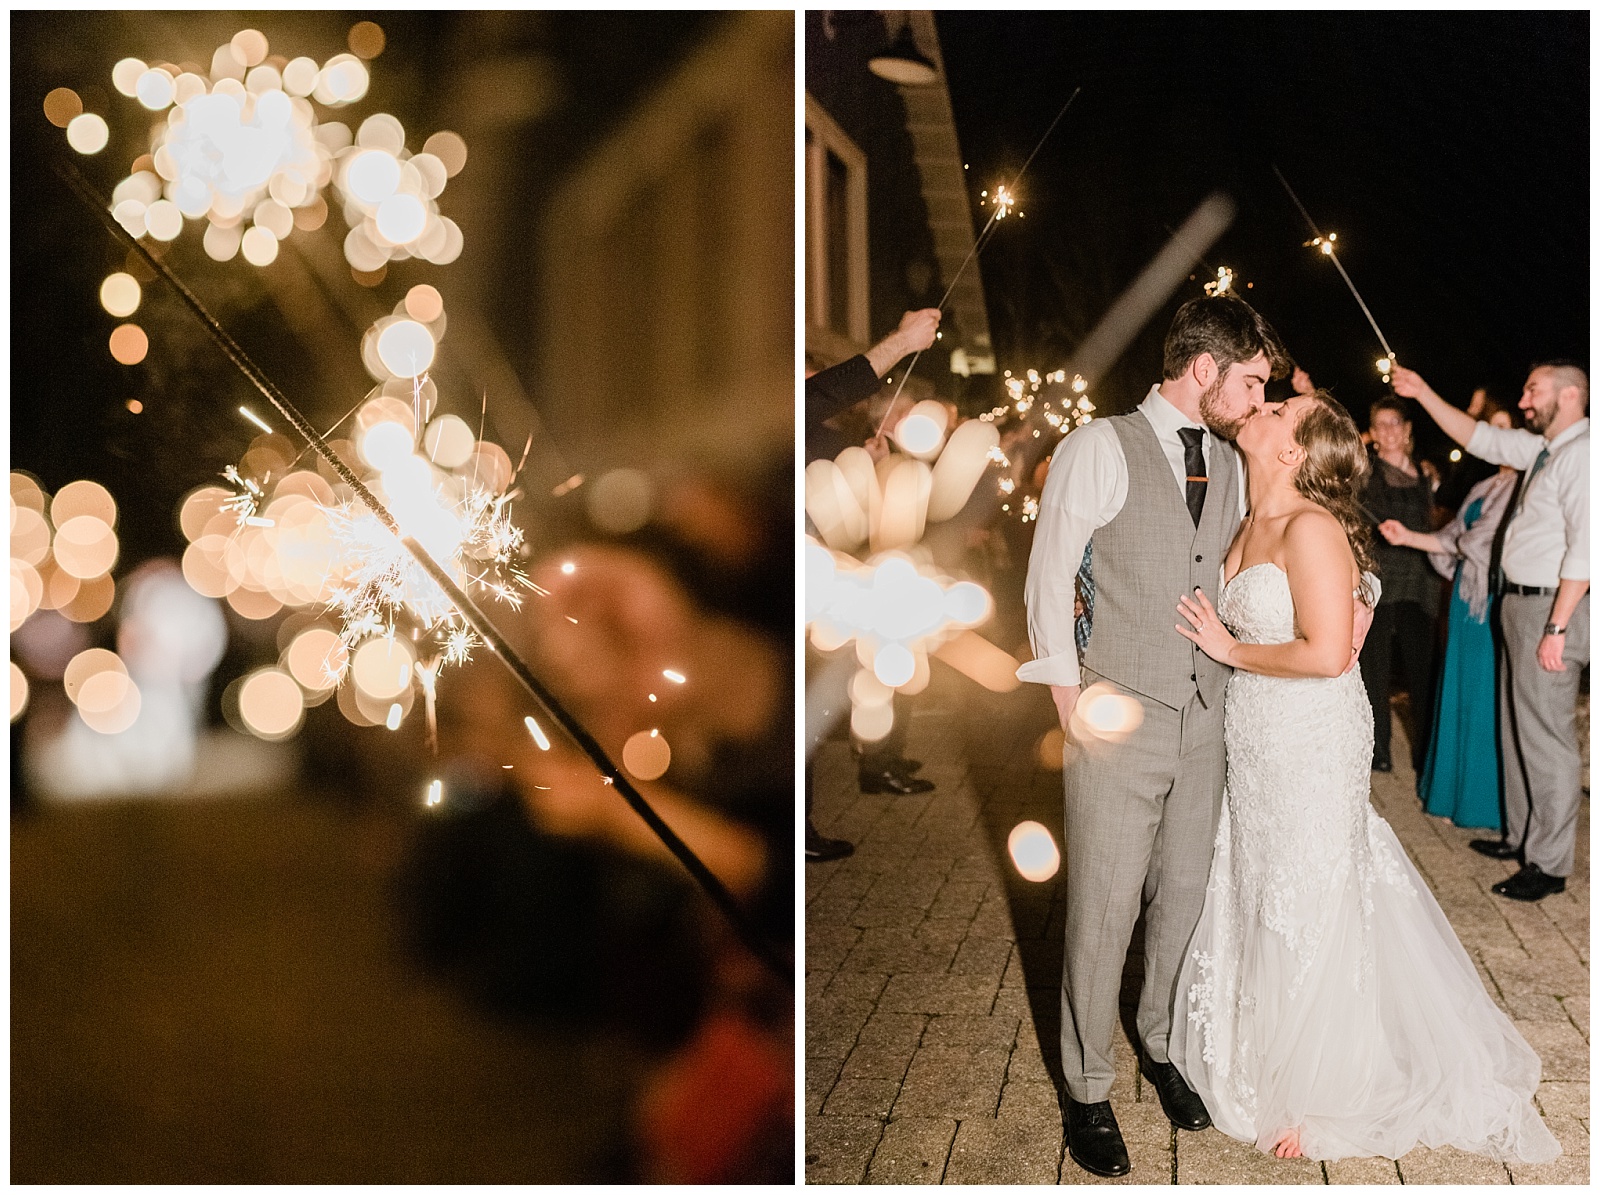 bride and groom kiss during sparkler exit at the end of the wedding.